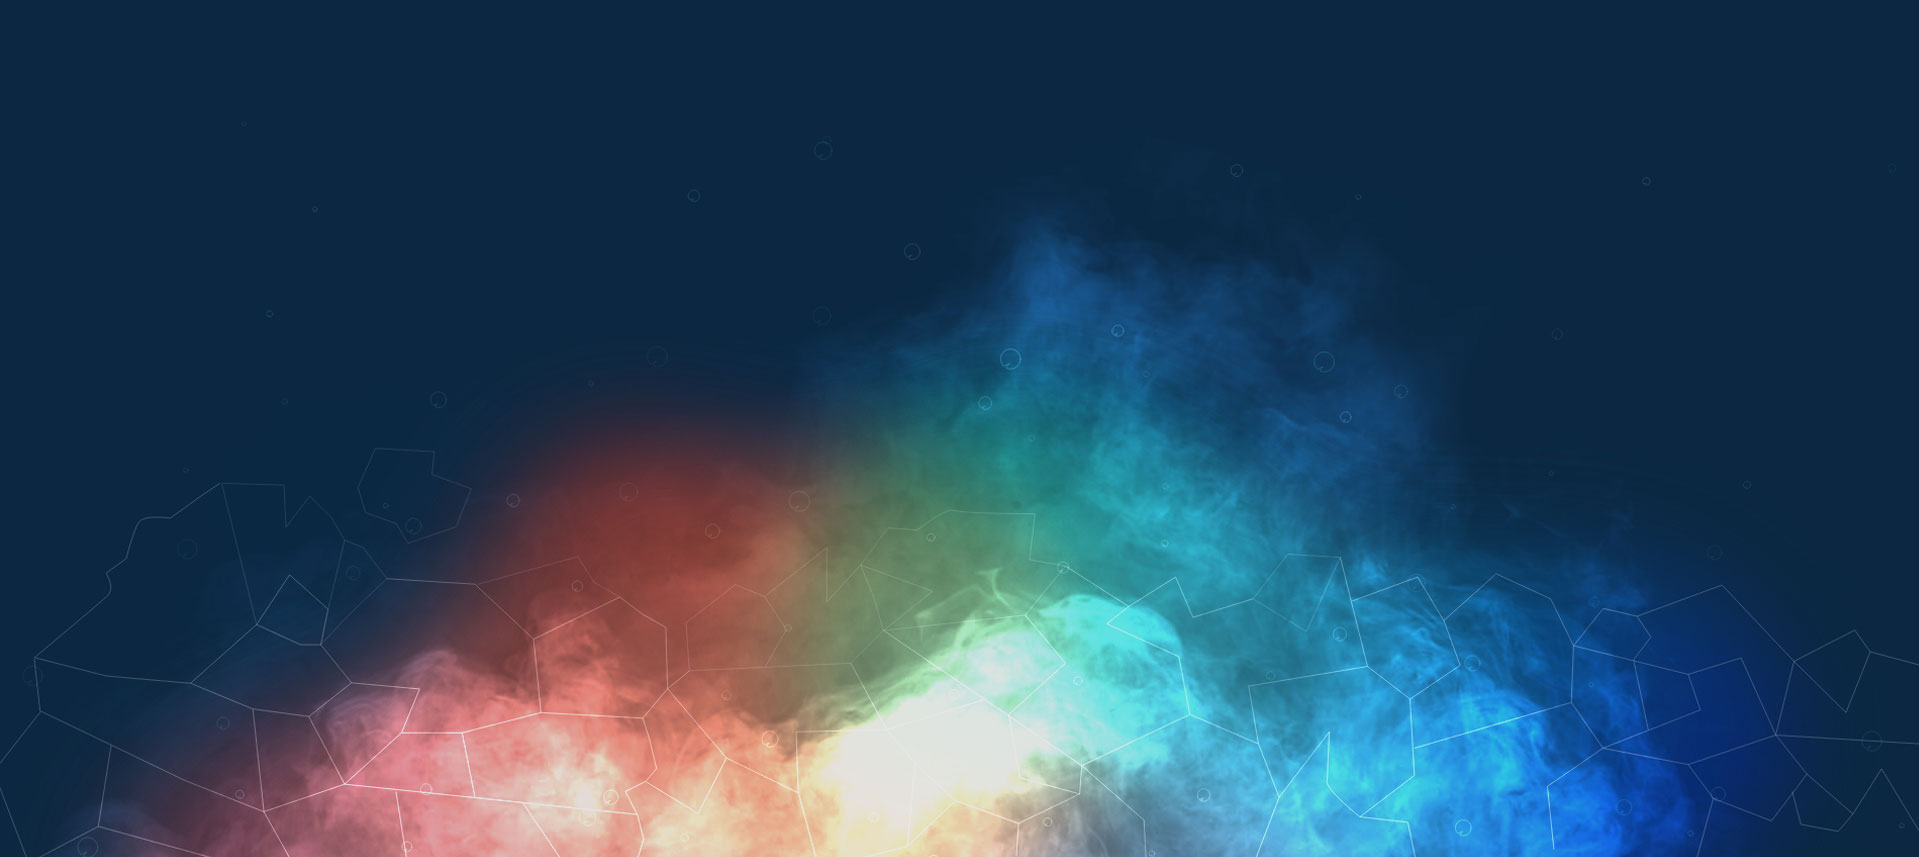 Dark blue header background with colored smoke and patterns.